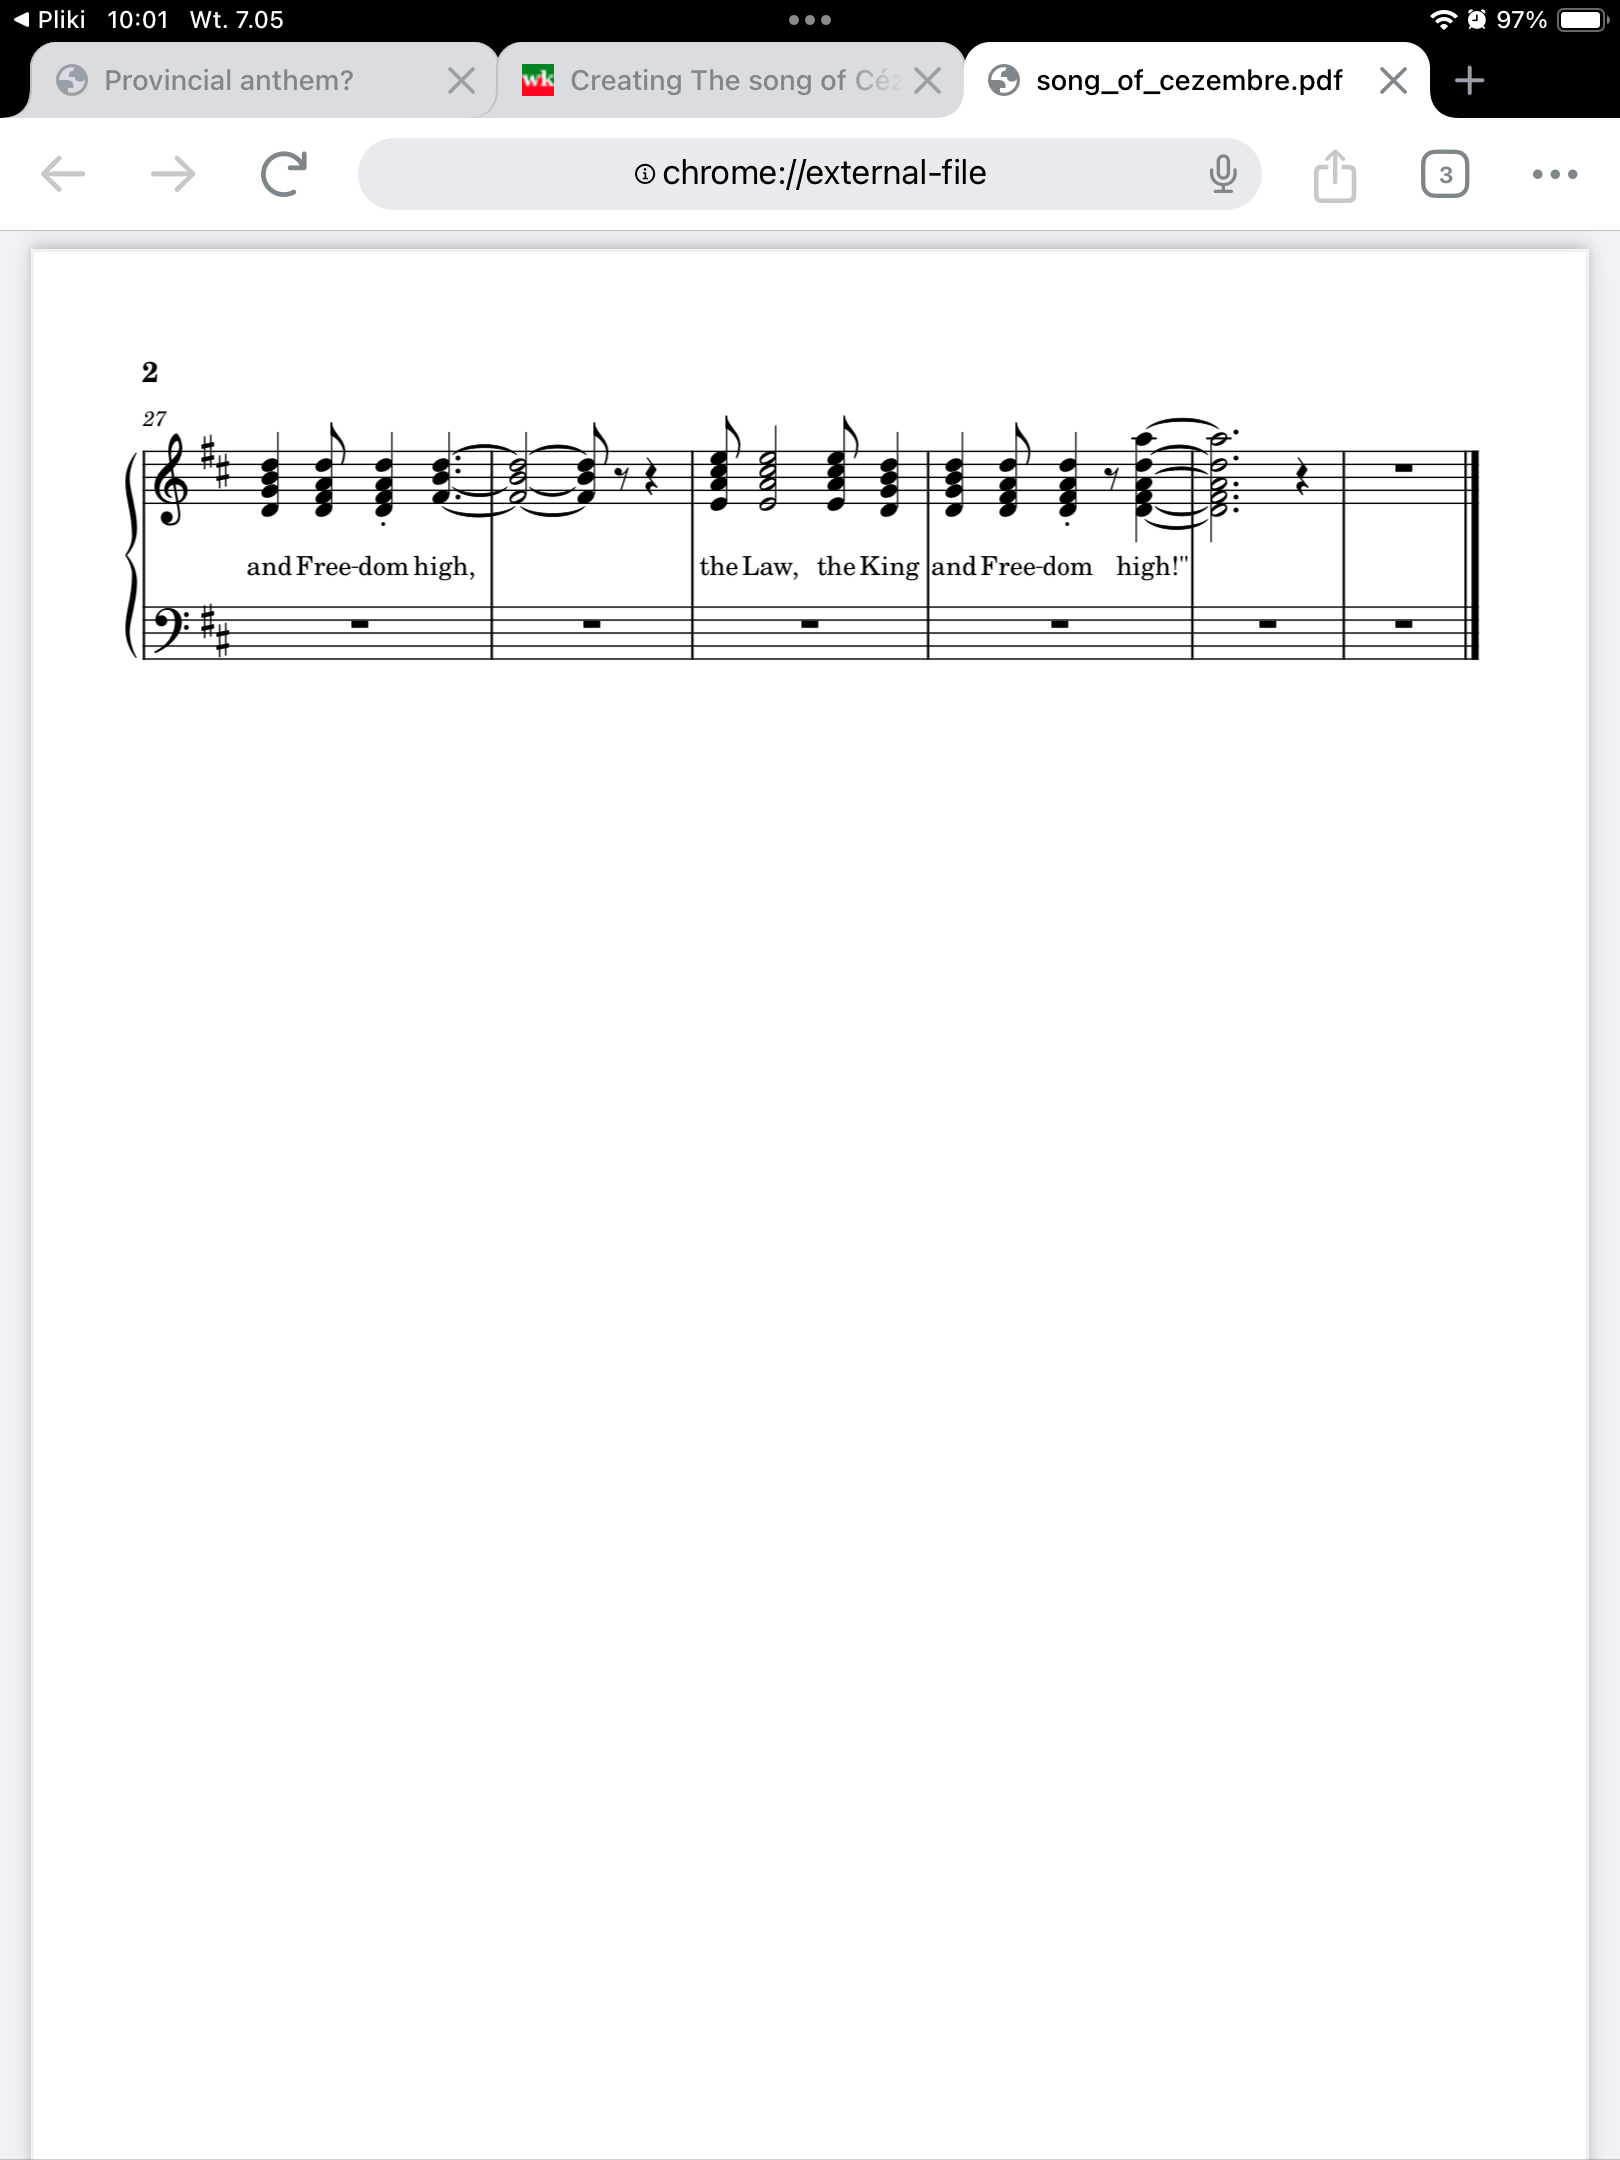 The song of Cézembre sheet music .png